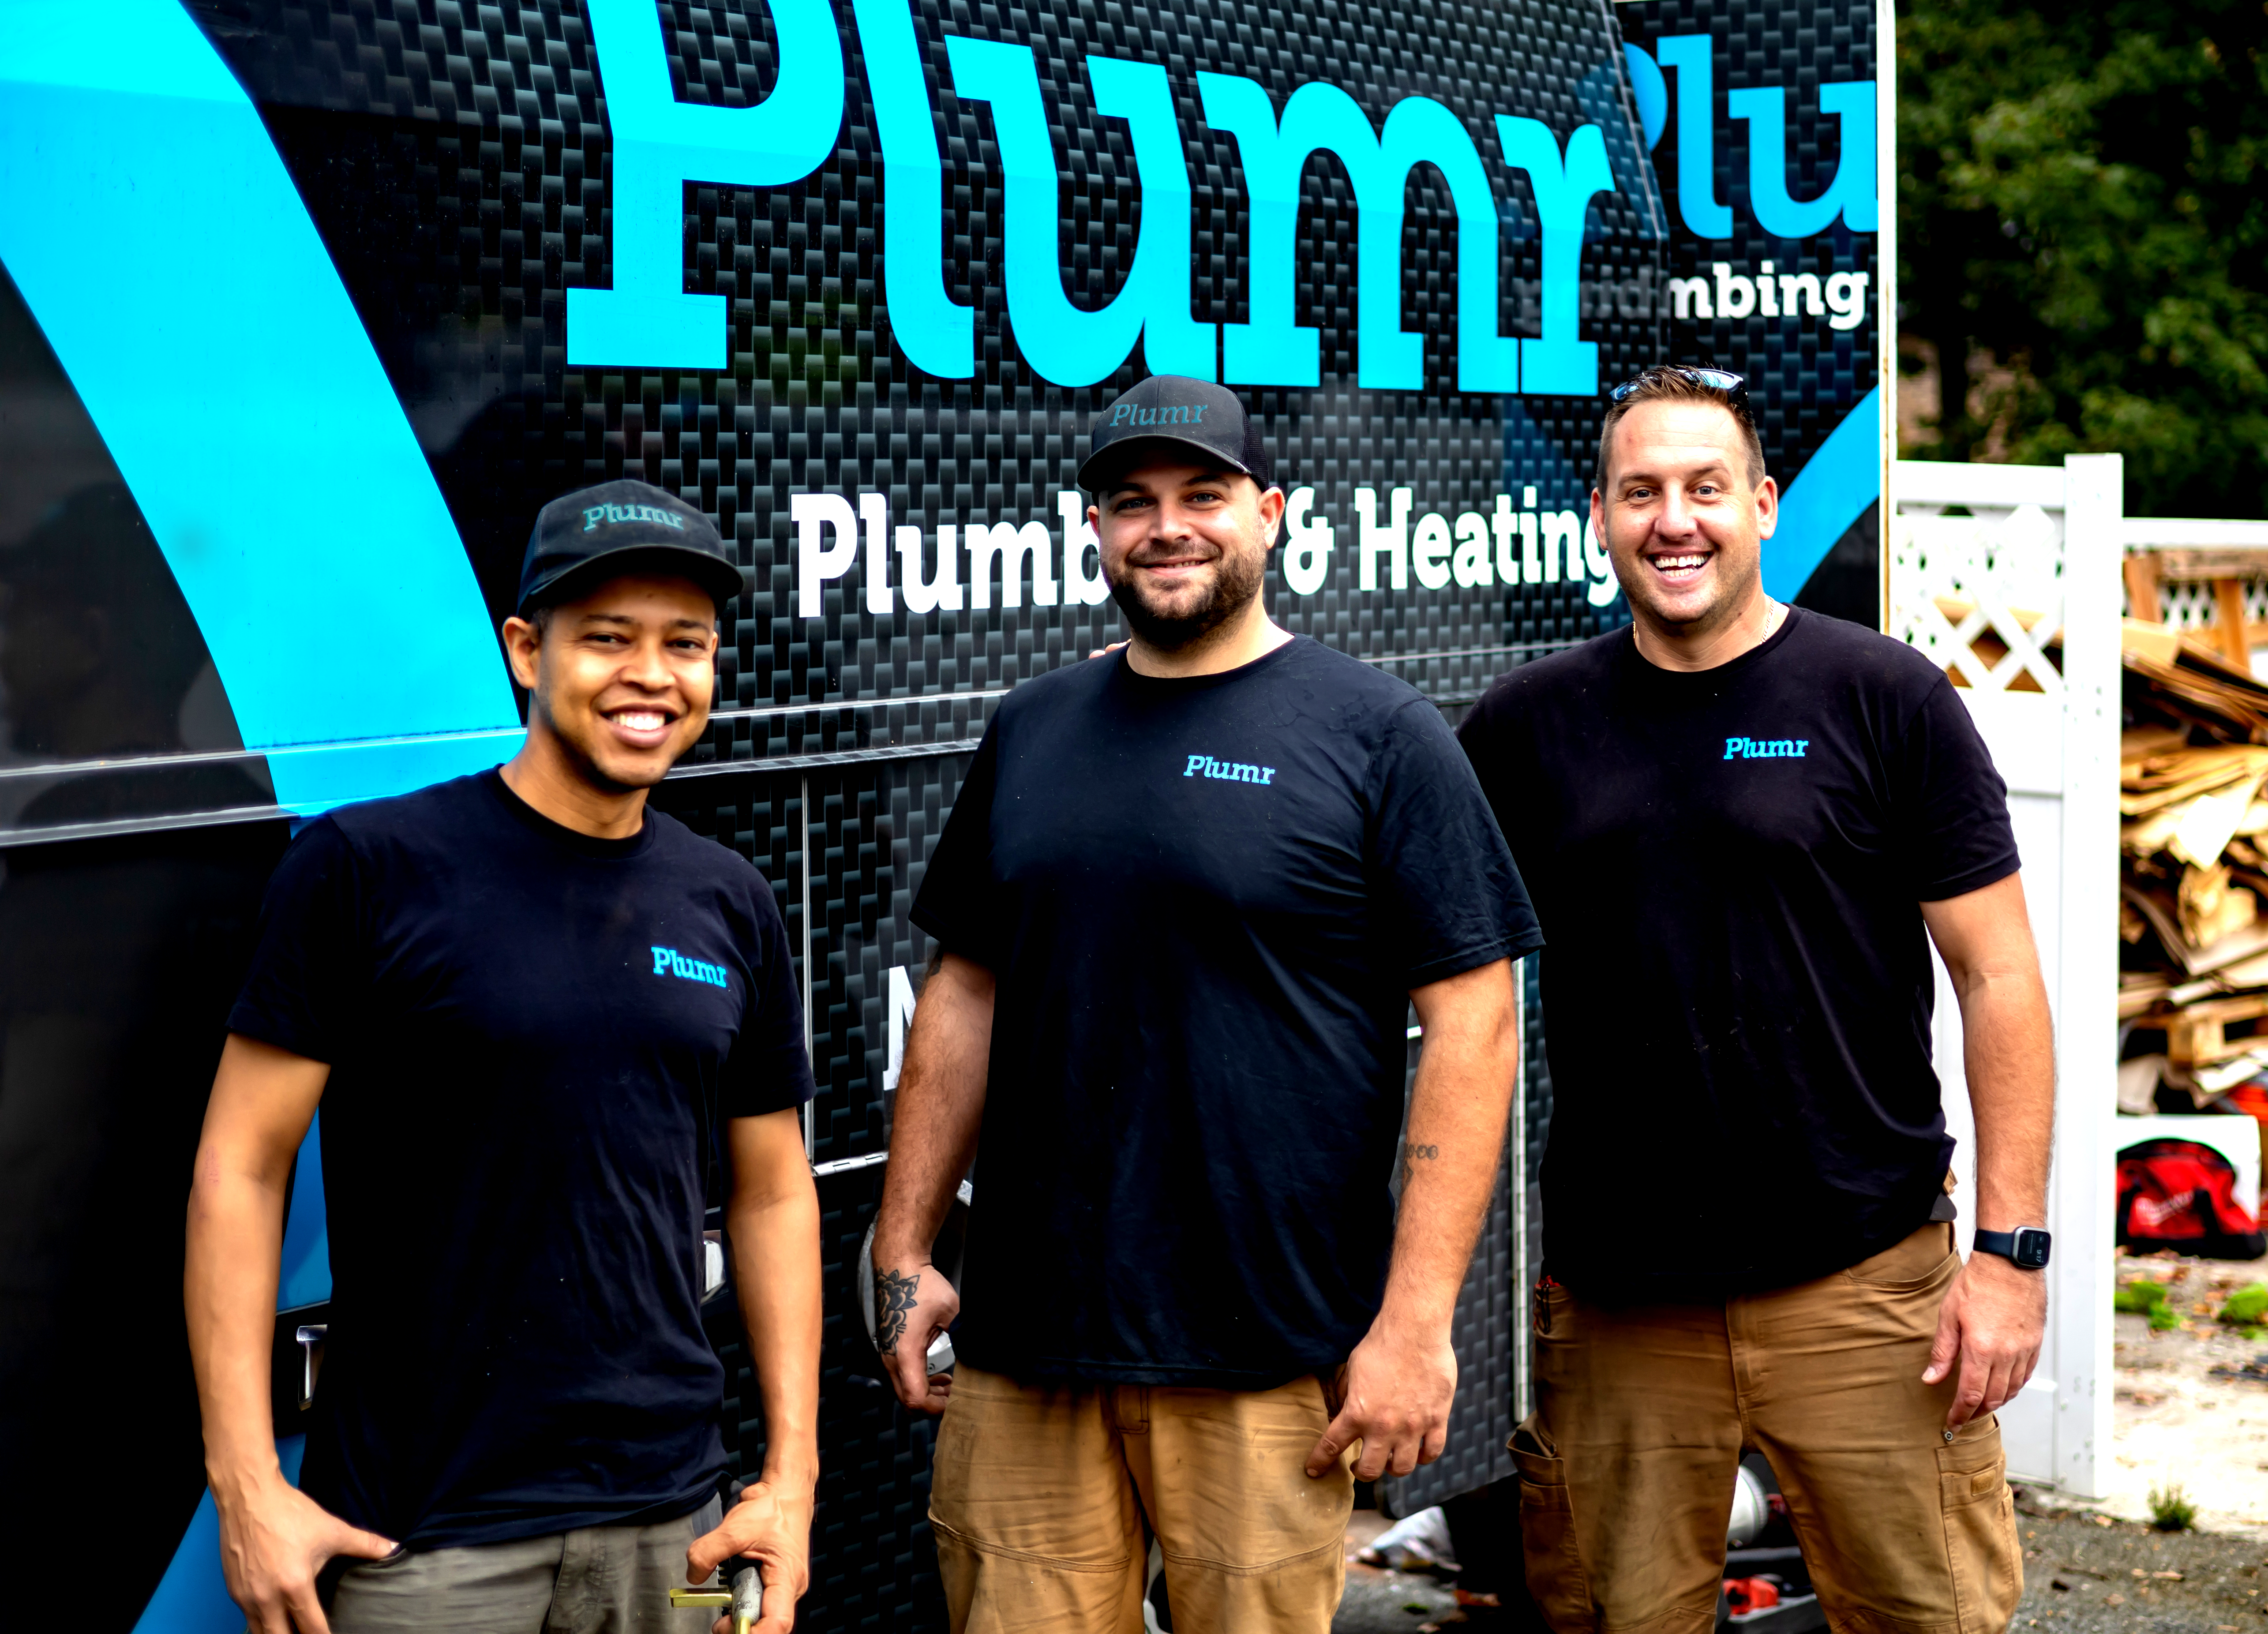 Plumbing Services in Saugus, MA